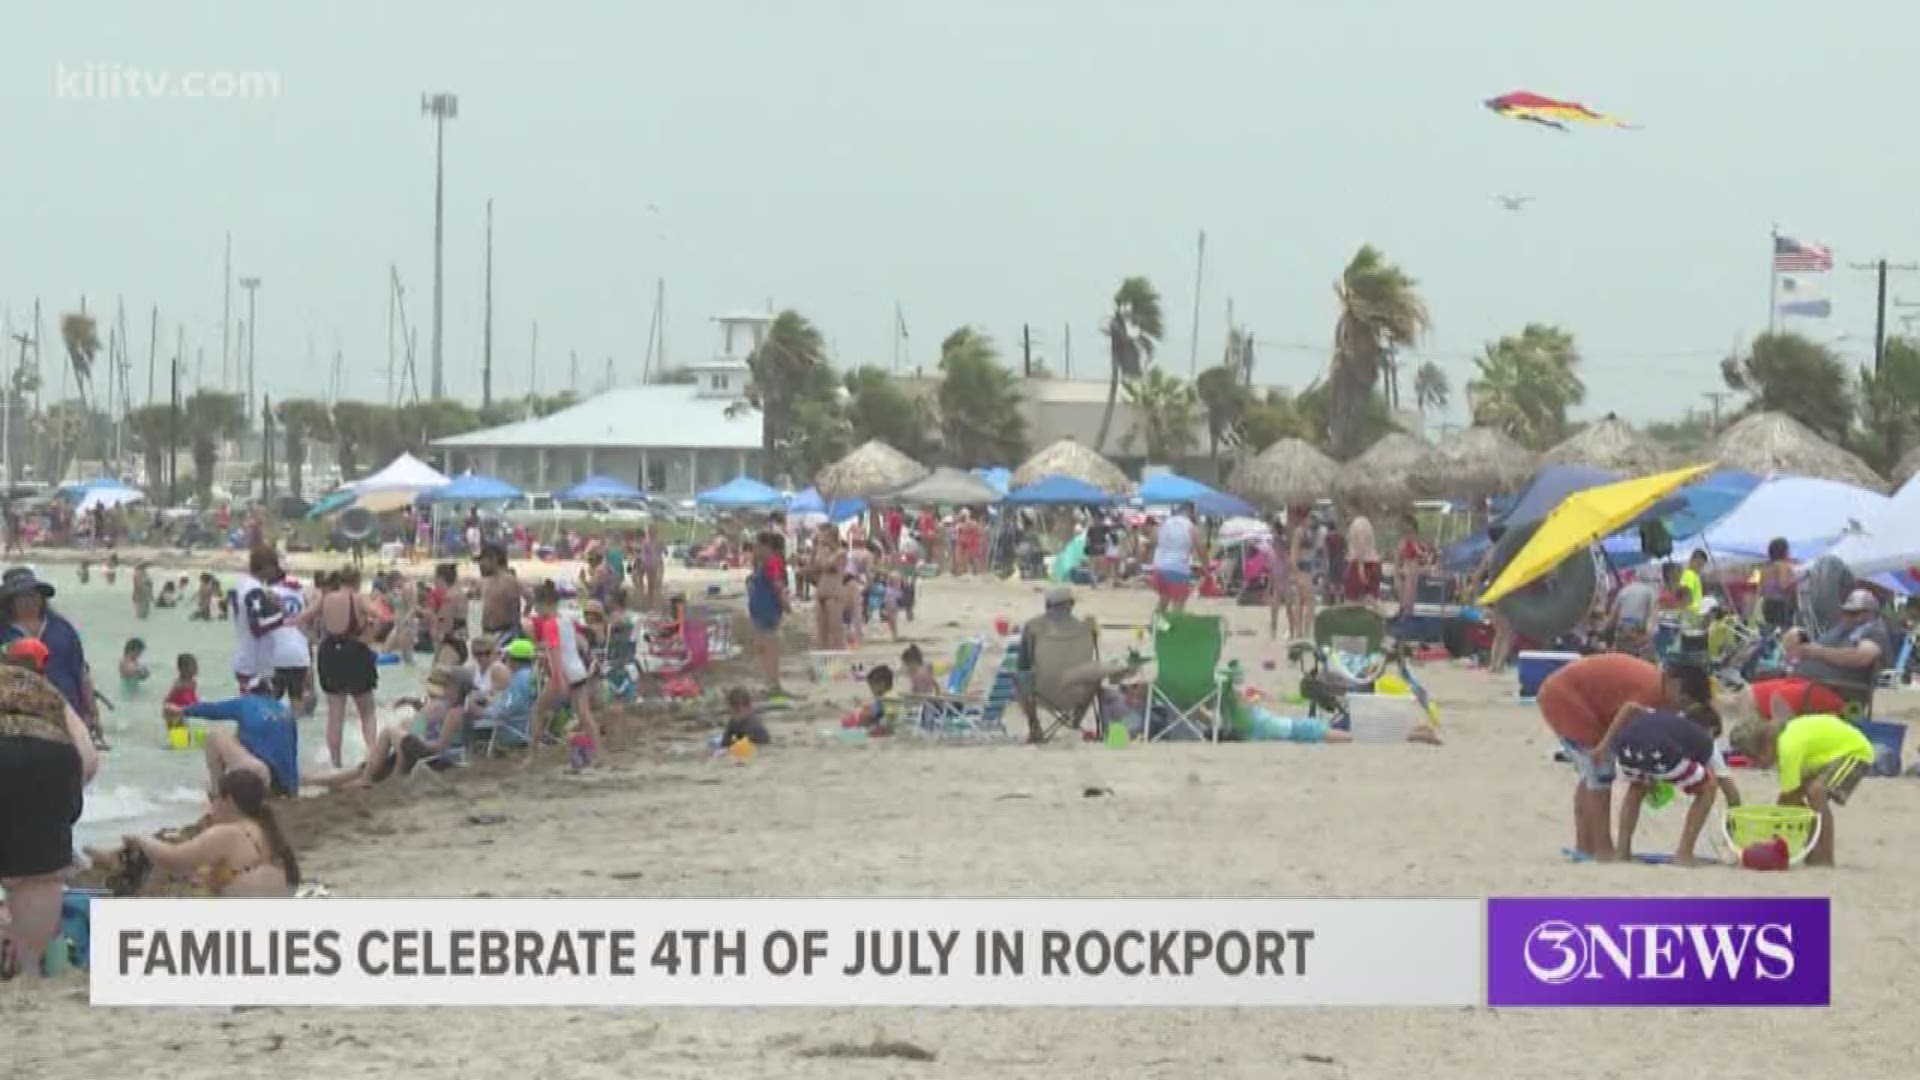 Dozens of Families gather in Rockport to celebrate 4th of July